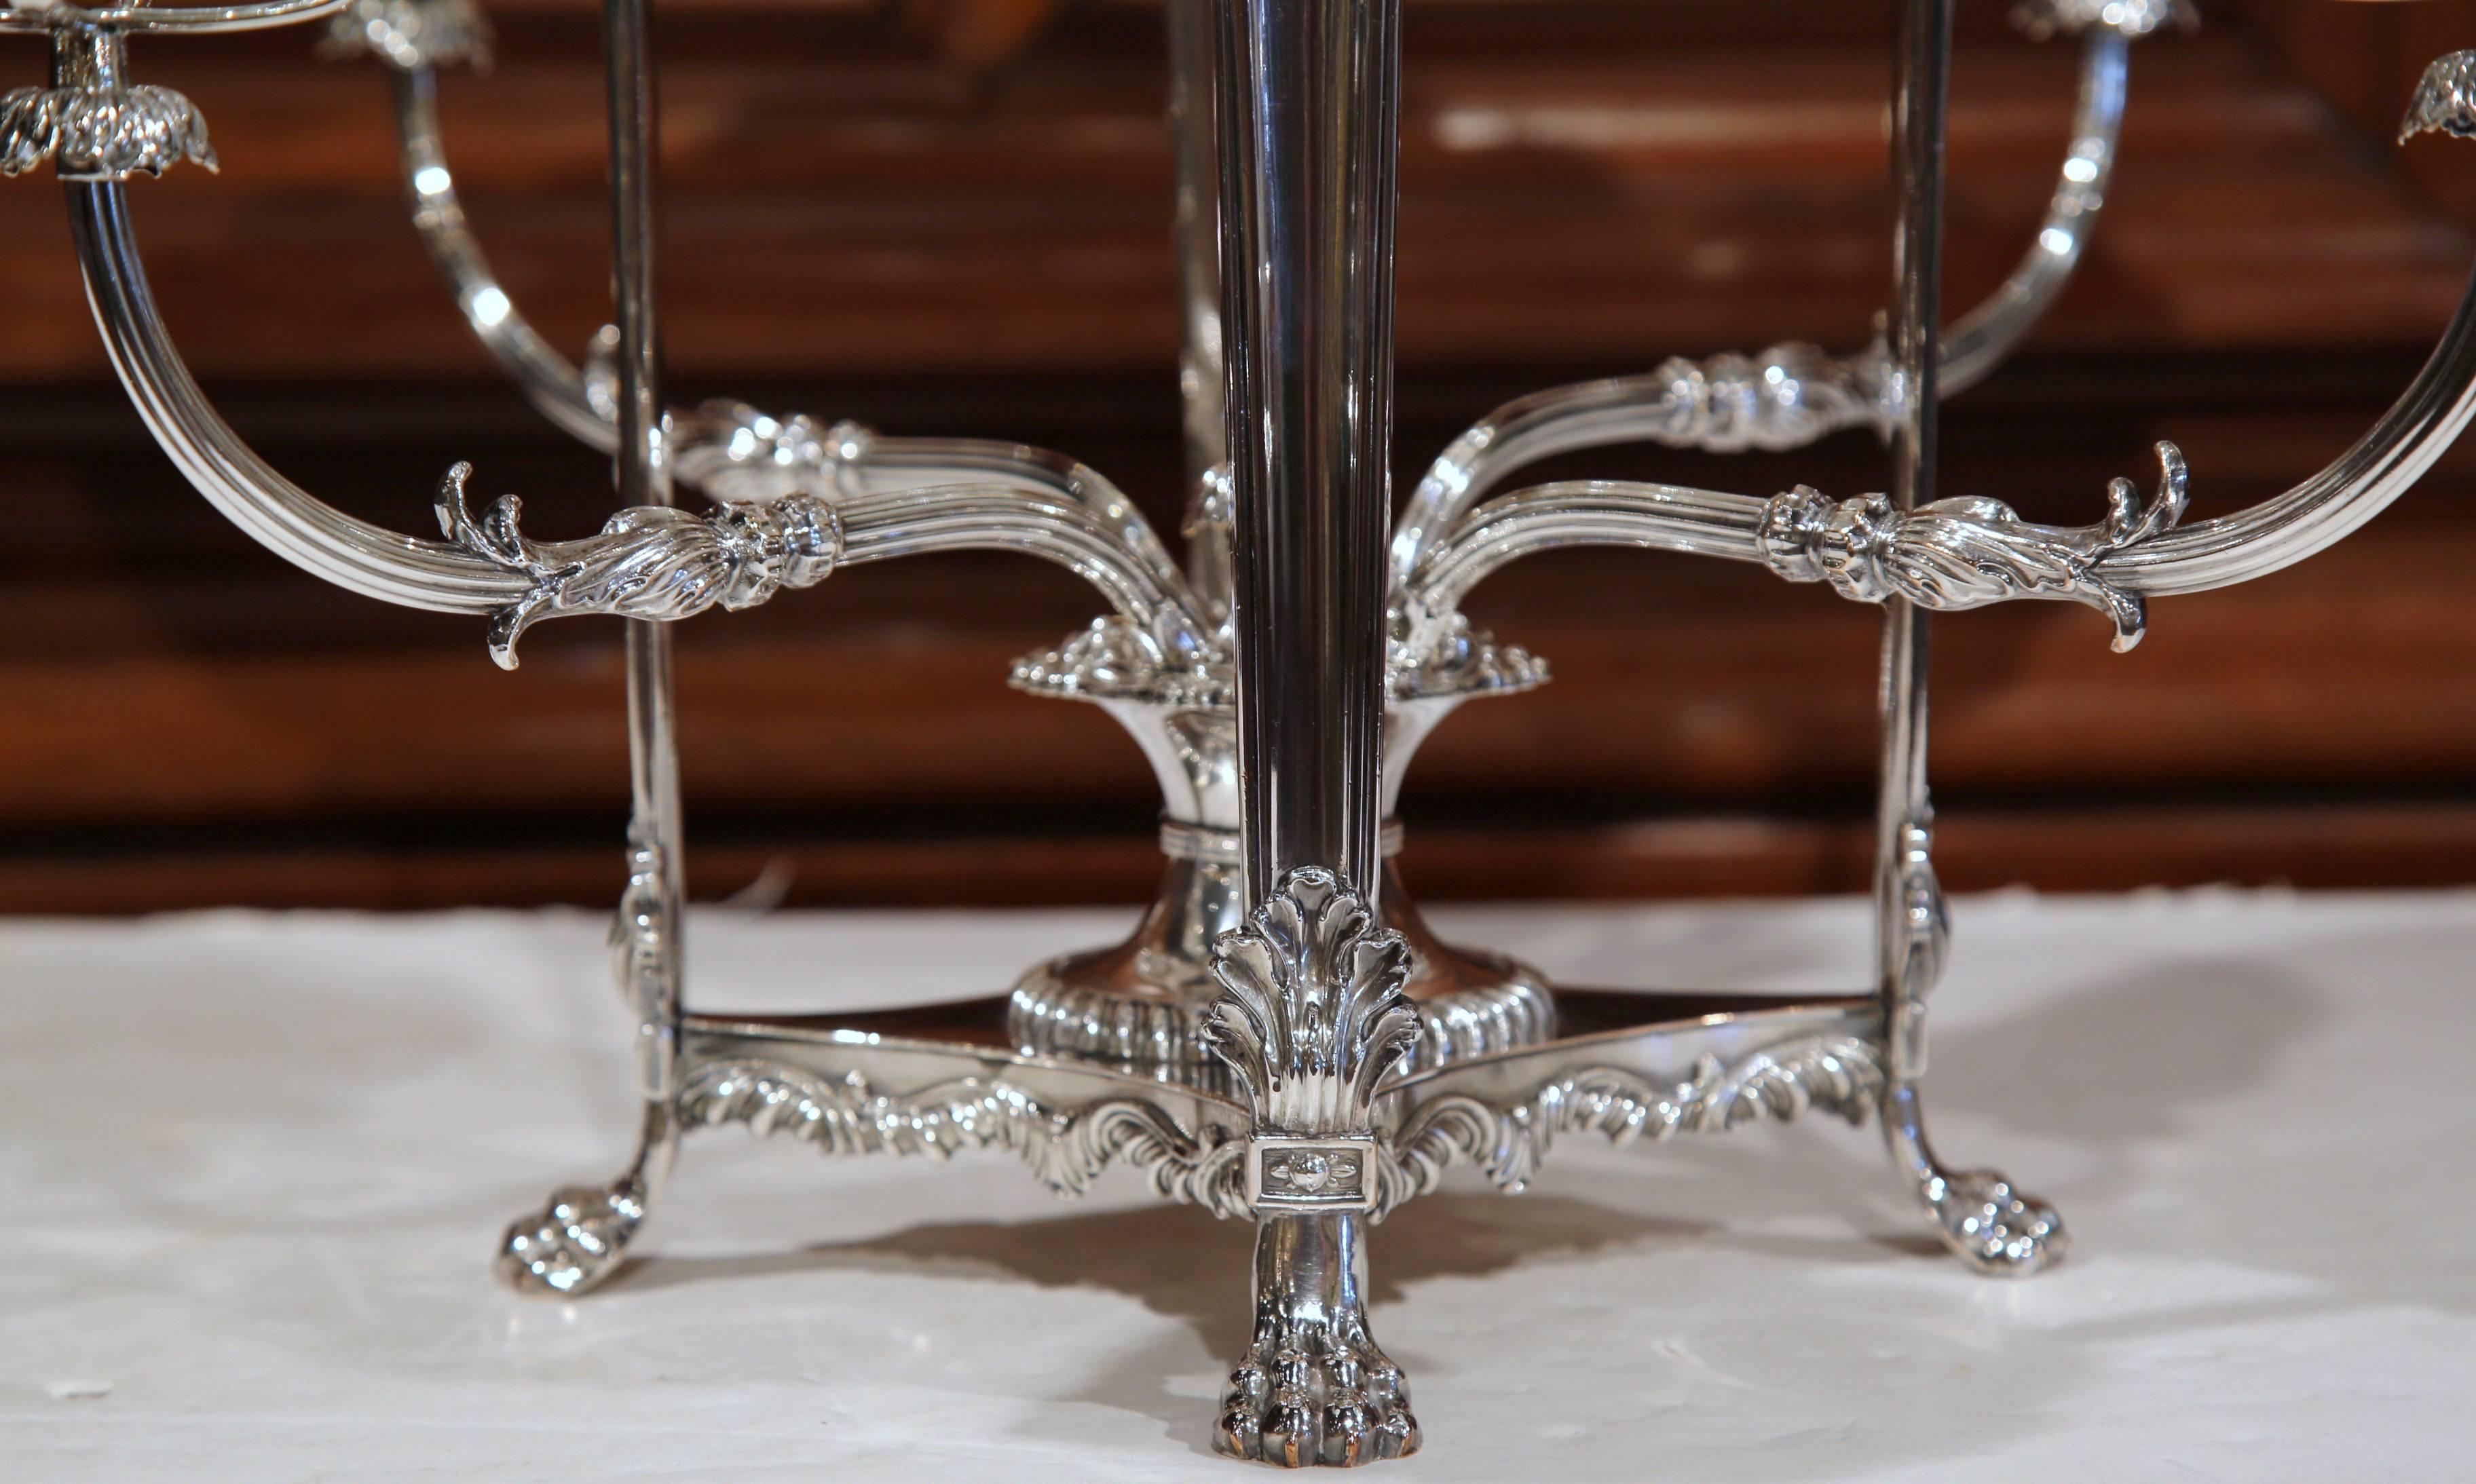 Hand-Crafted 19th Century English George III Style Silver-Plated and Cut-Glass Epergne